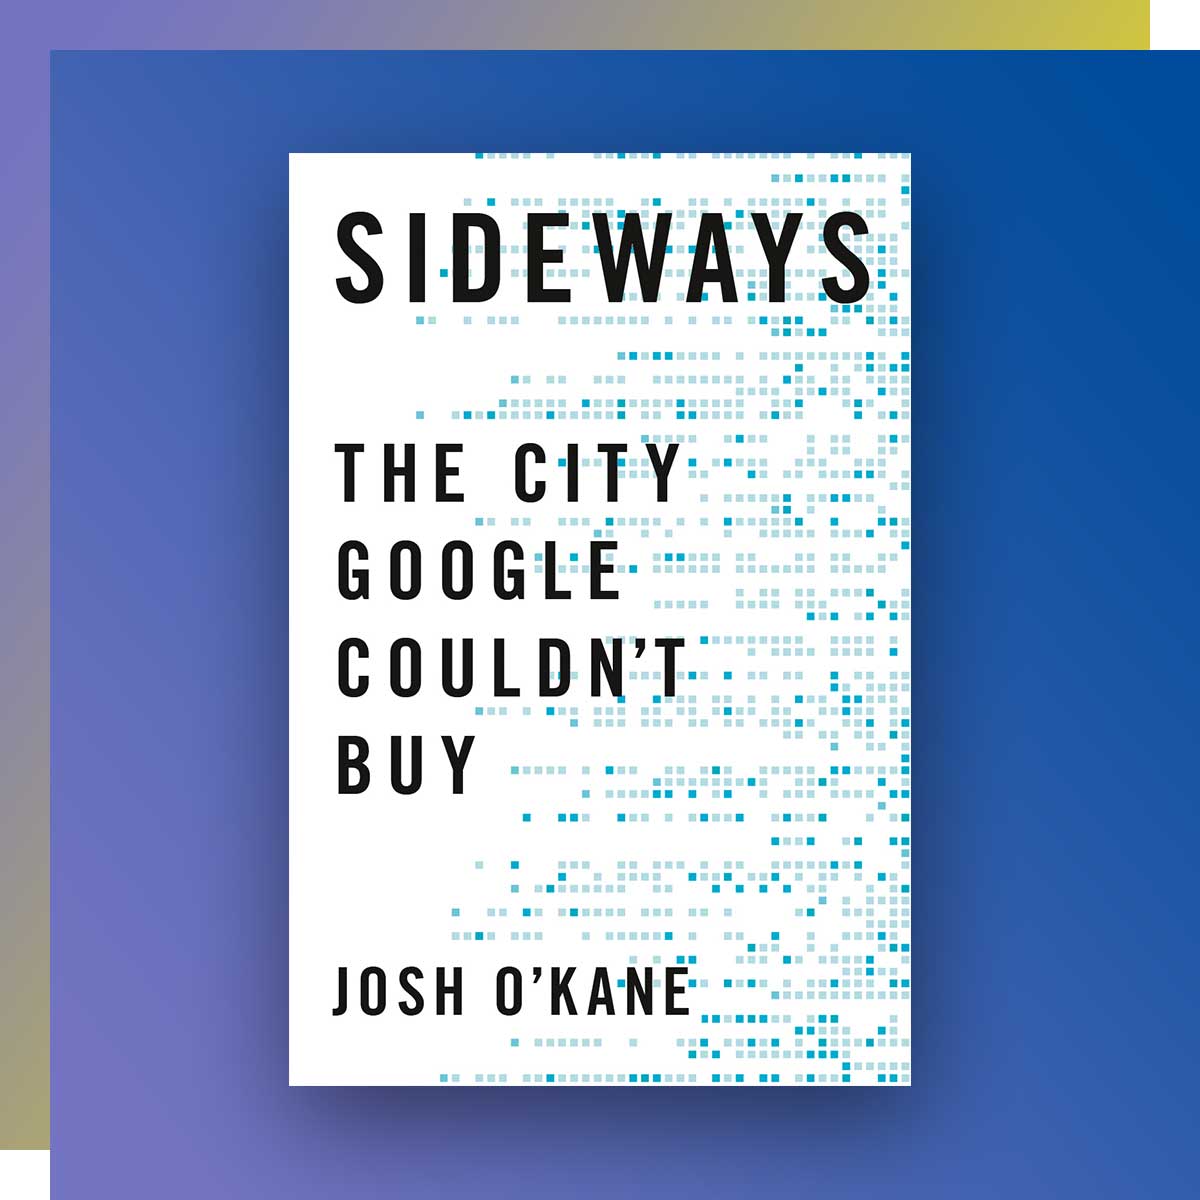 Sideways - The City Google Couldn’t Buy by Josh O’Kane